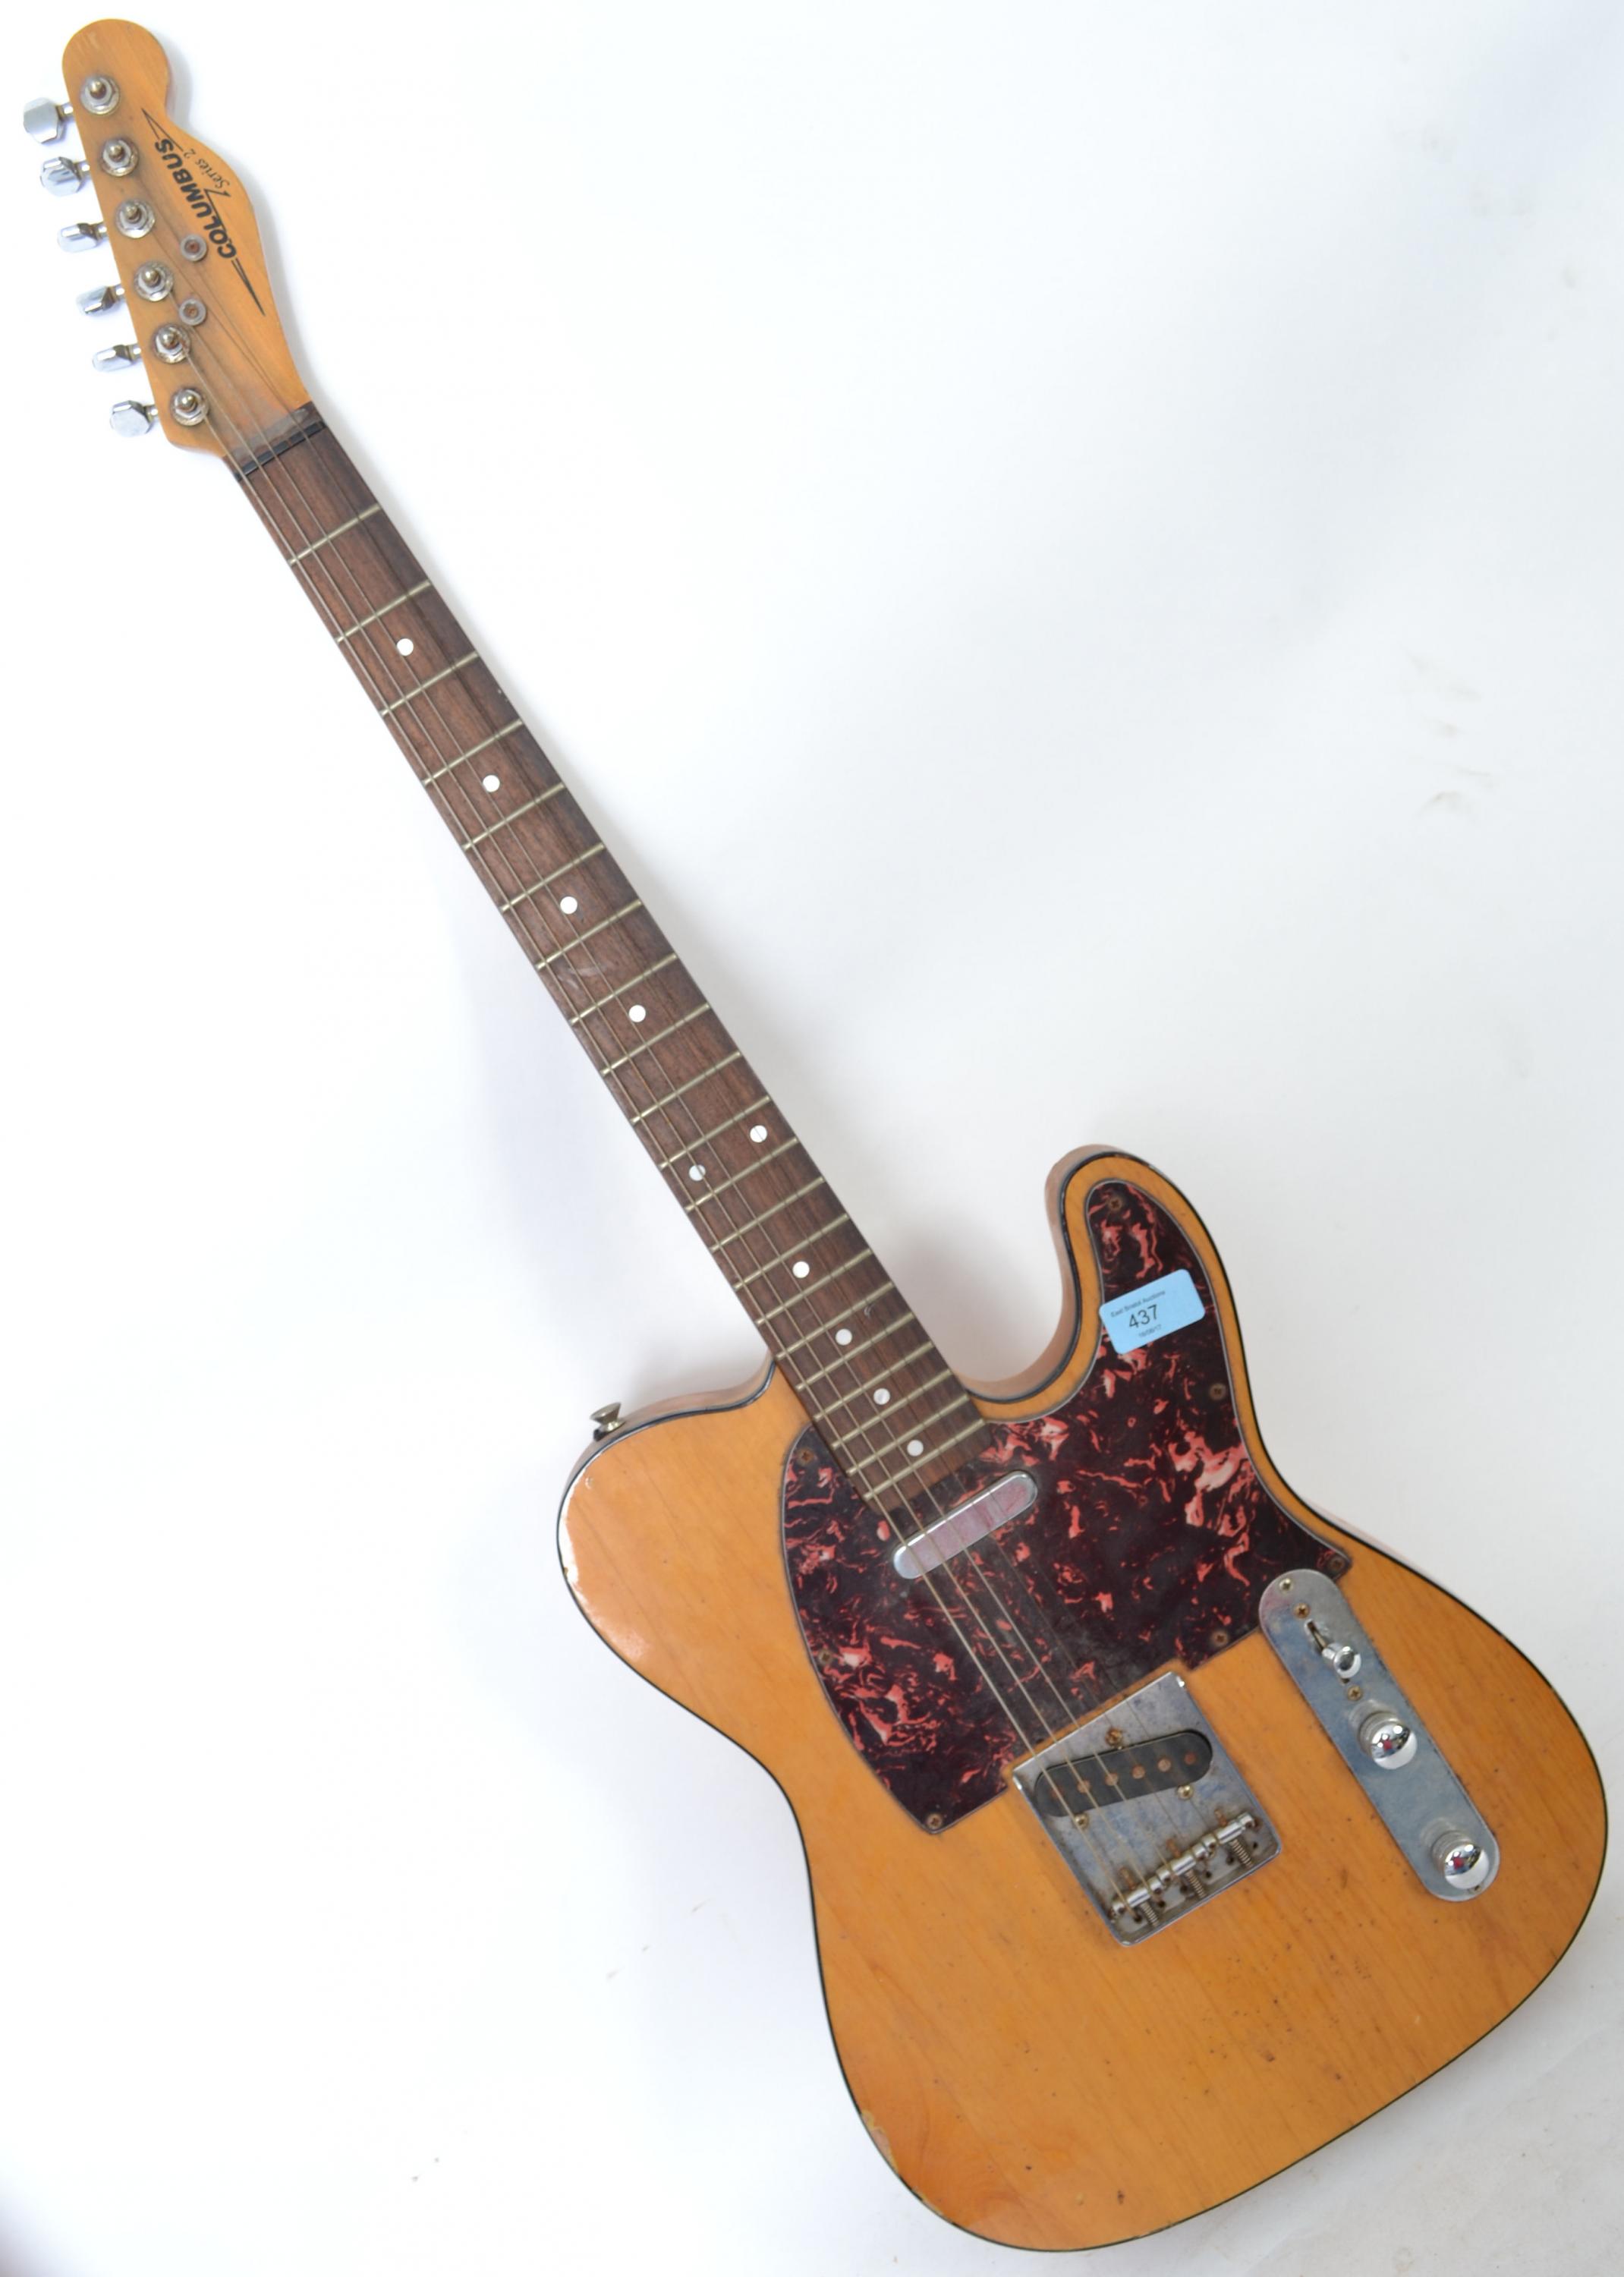 Telecaster Love Thread, No Archtops Allowed-img_3245-jpg